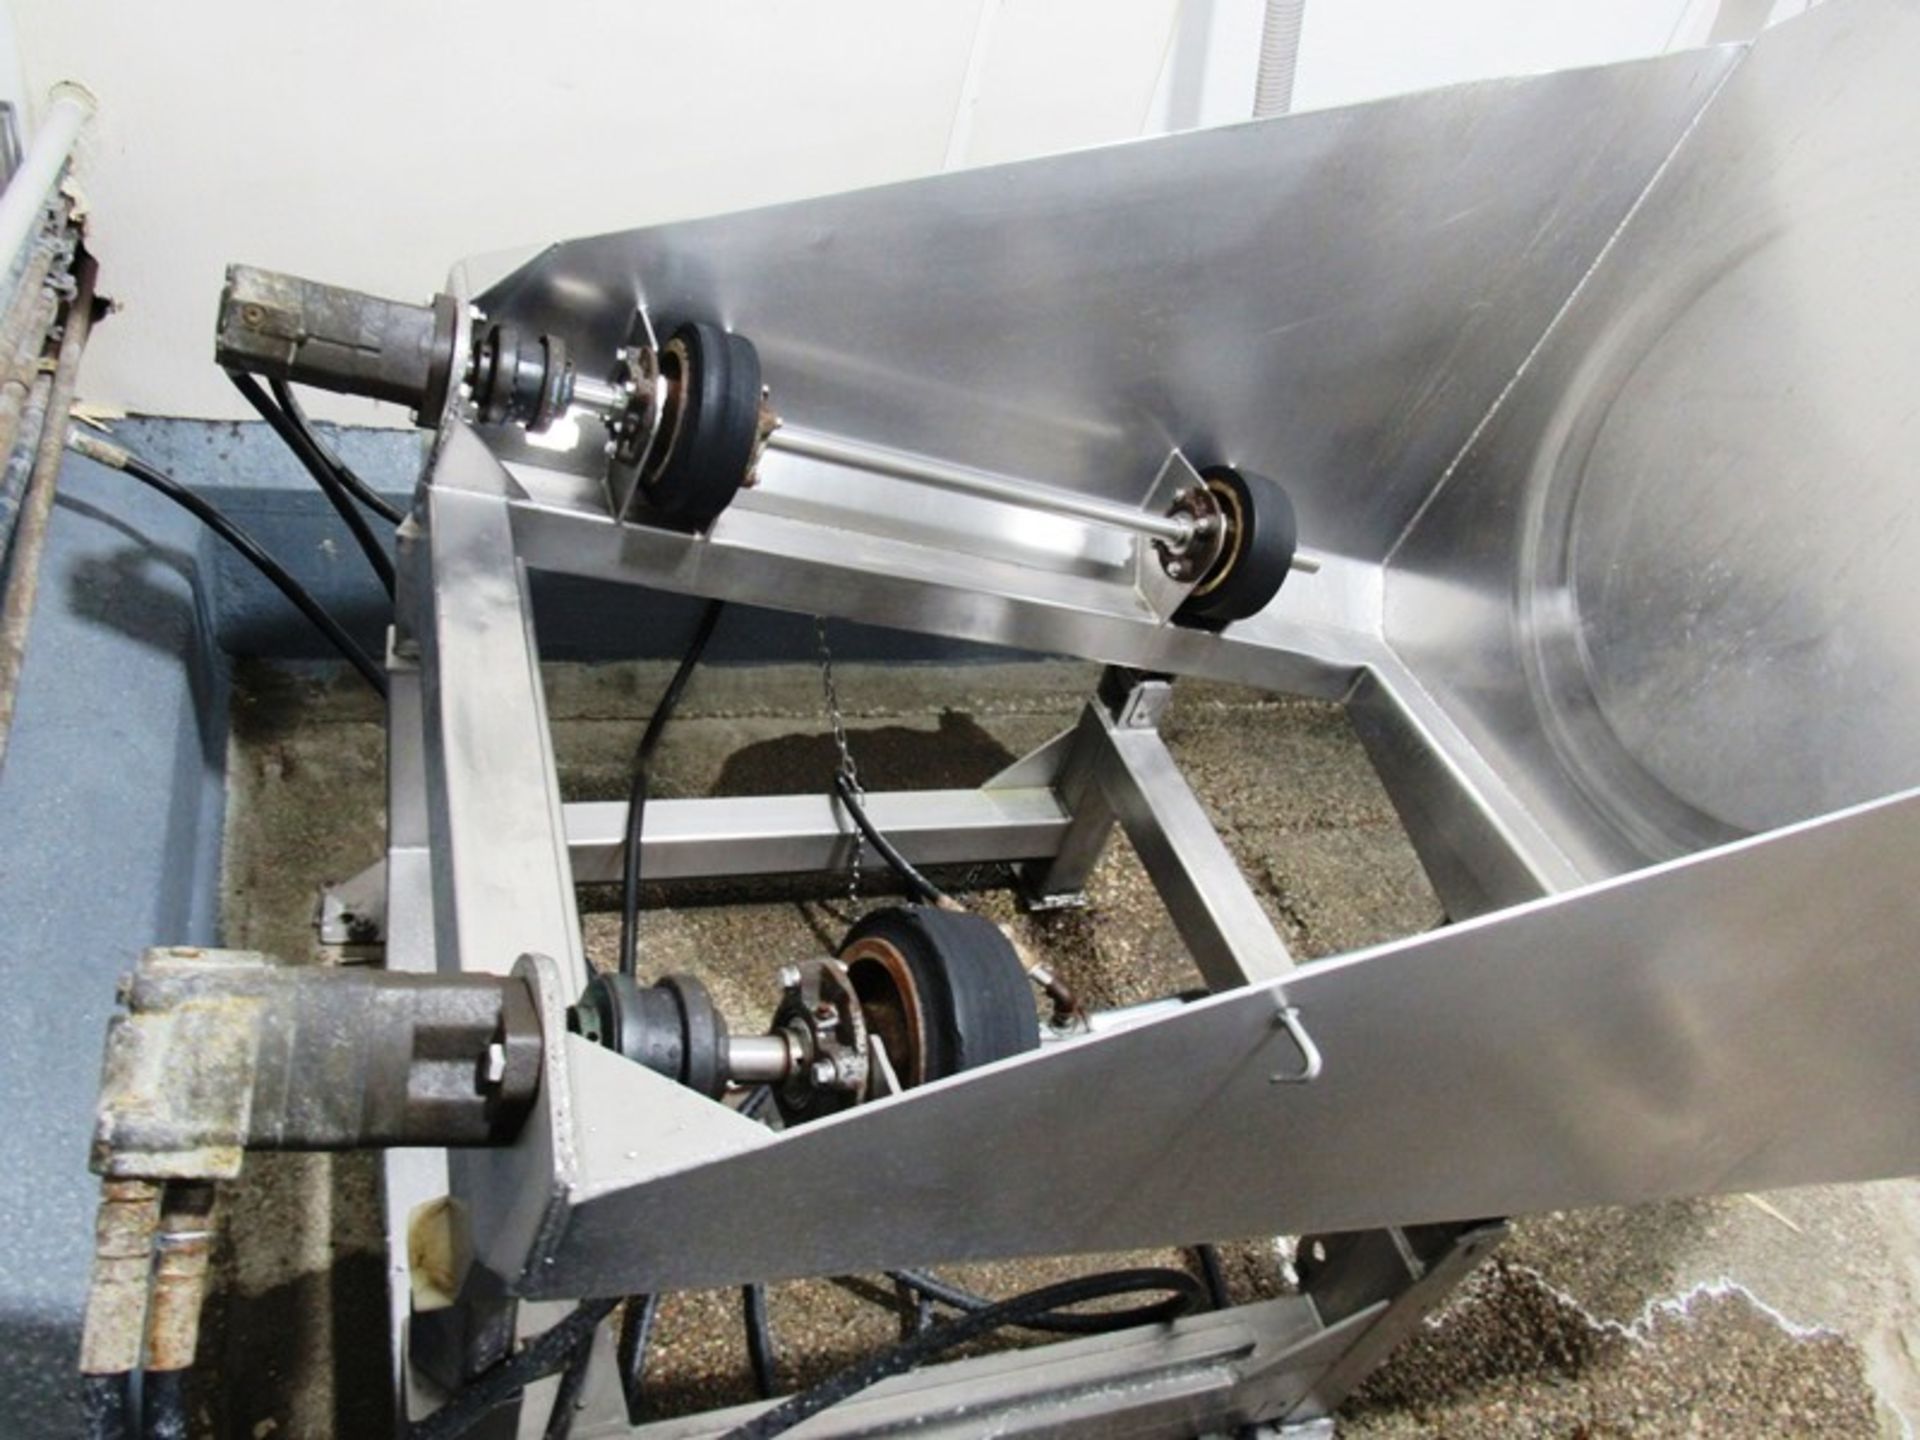 Globus Mdl. HS 3/5 Tumbling System, tumbling bed, (1) 750 liter stainless steel drum with lid, - Image 2 of 6